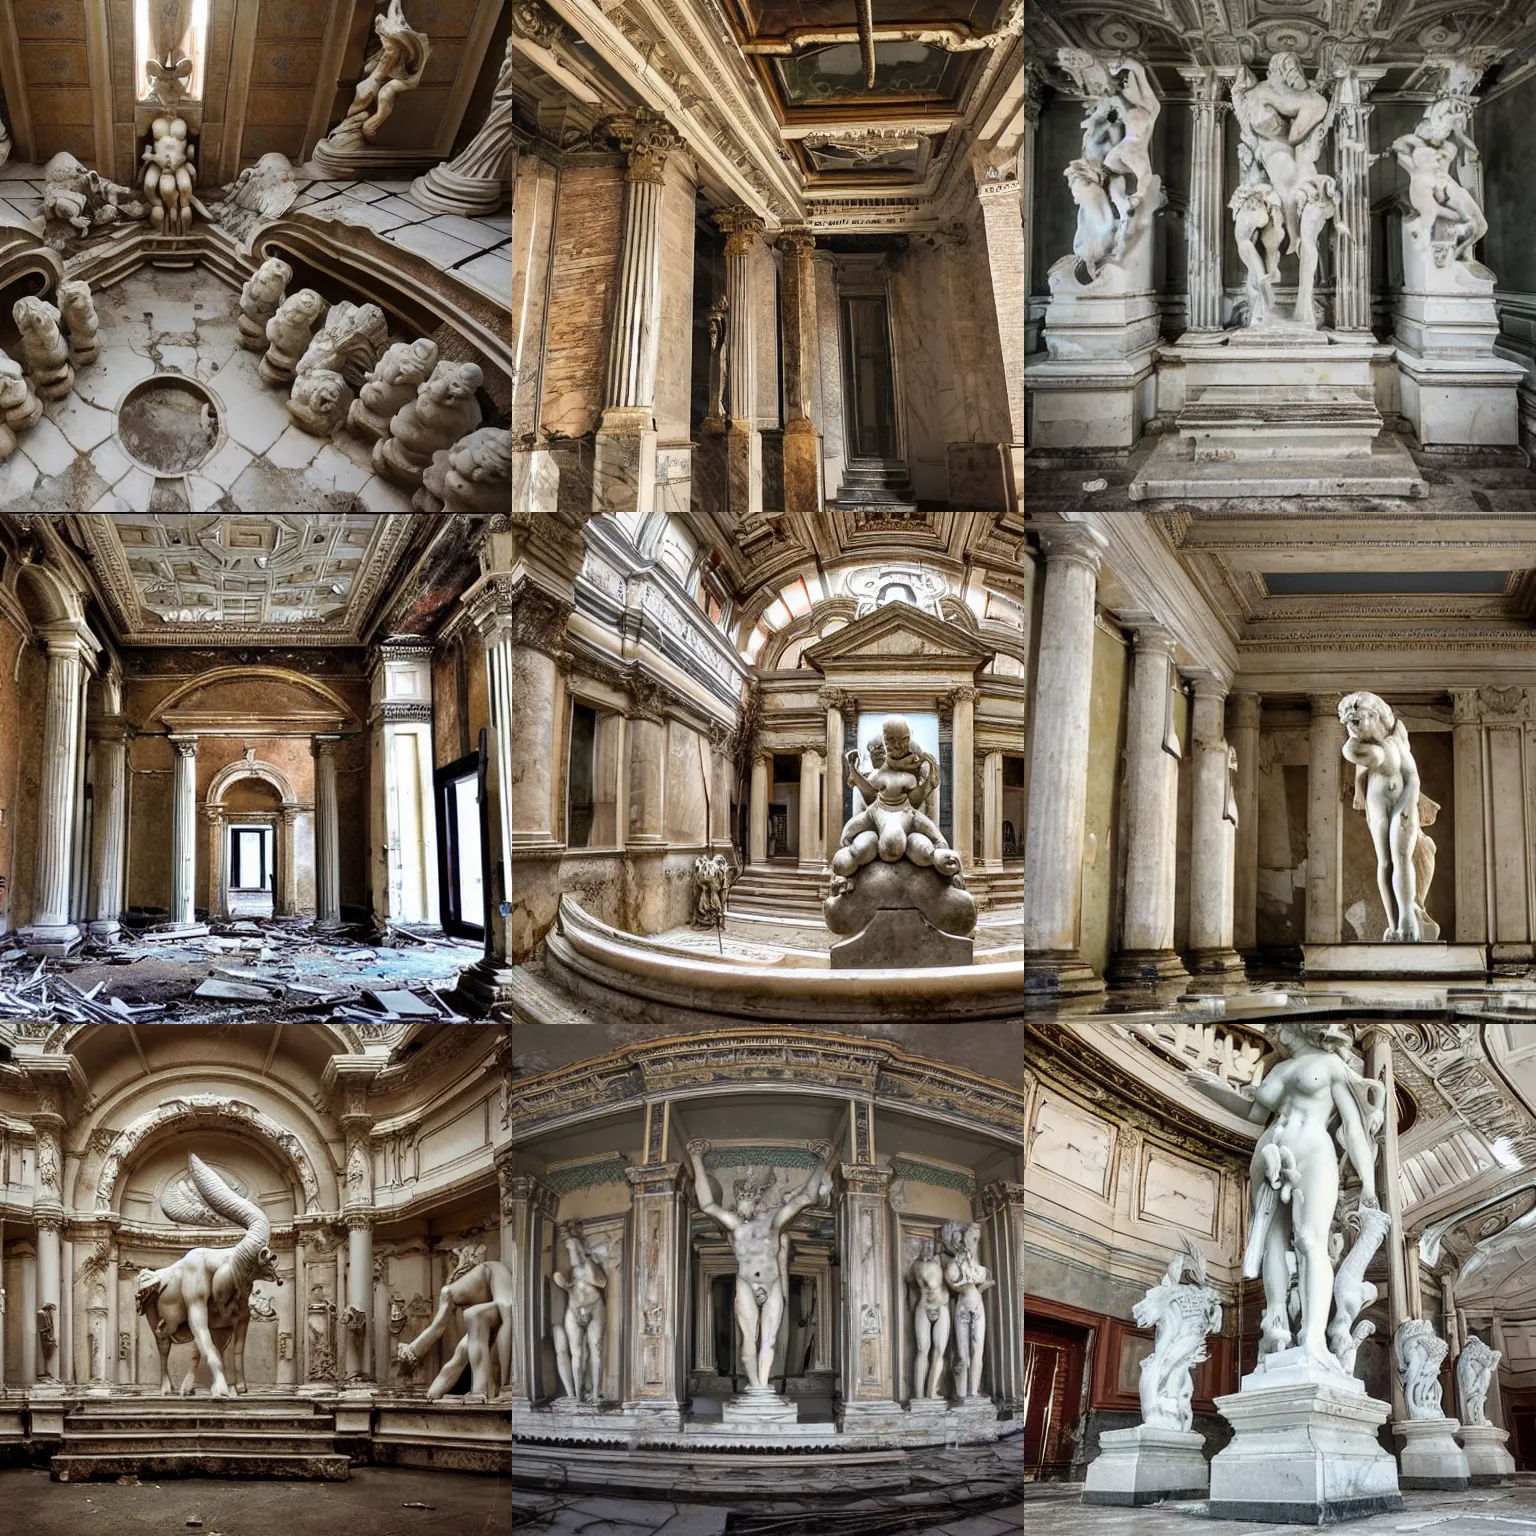 Prompt: photo piranessi symmetry flooded connected neoclassic halls and beautiful human statues myriad of huge marble staircases minotaur gods pelicans helenistic classic statues sculptures decrepit derelict abandoned - t